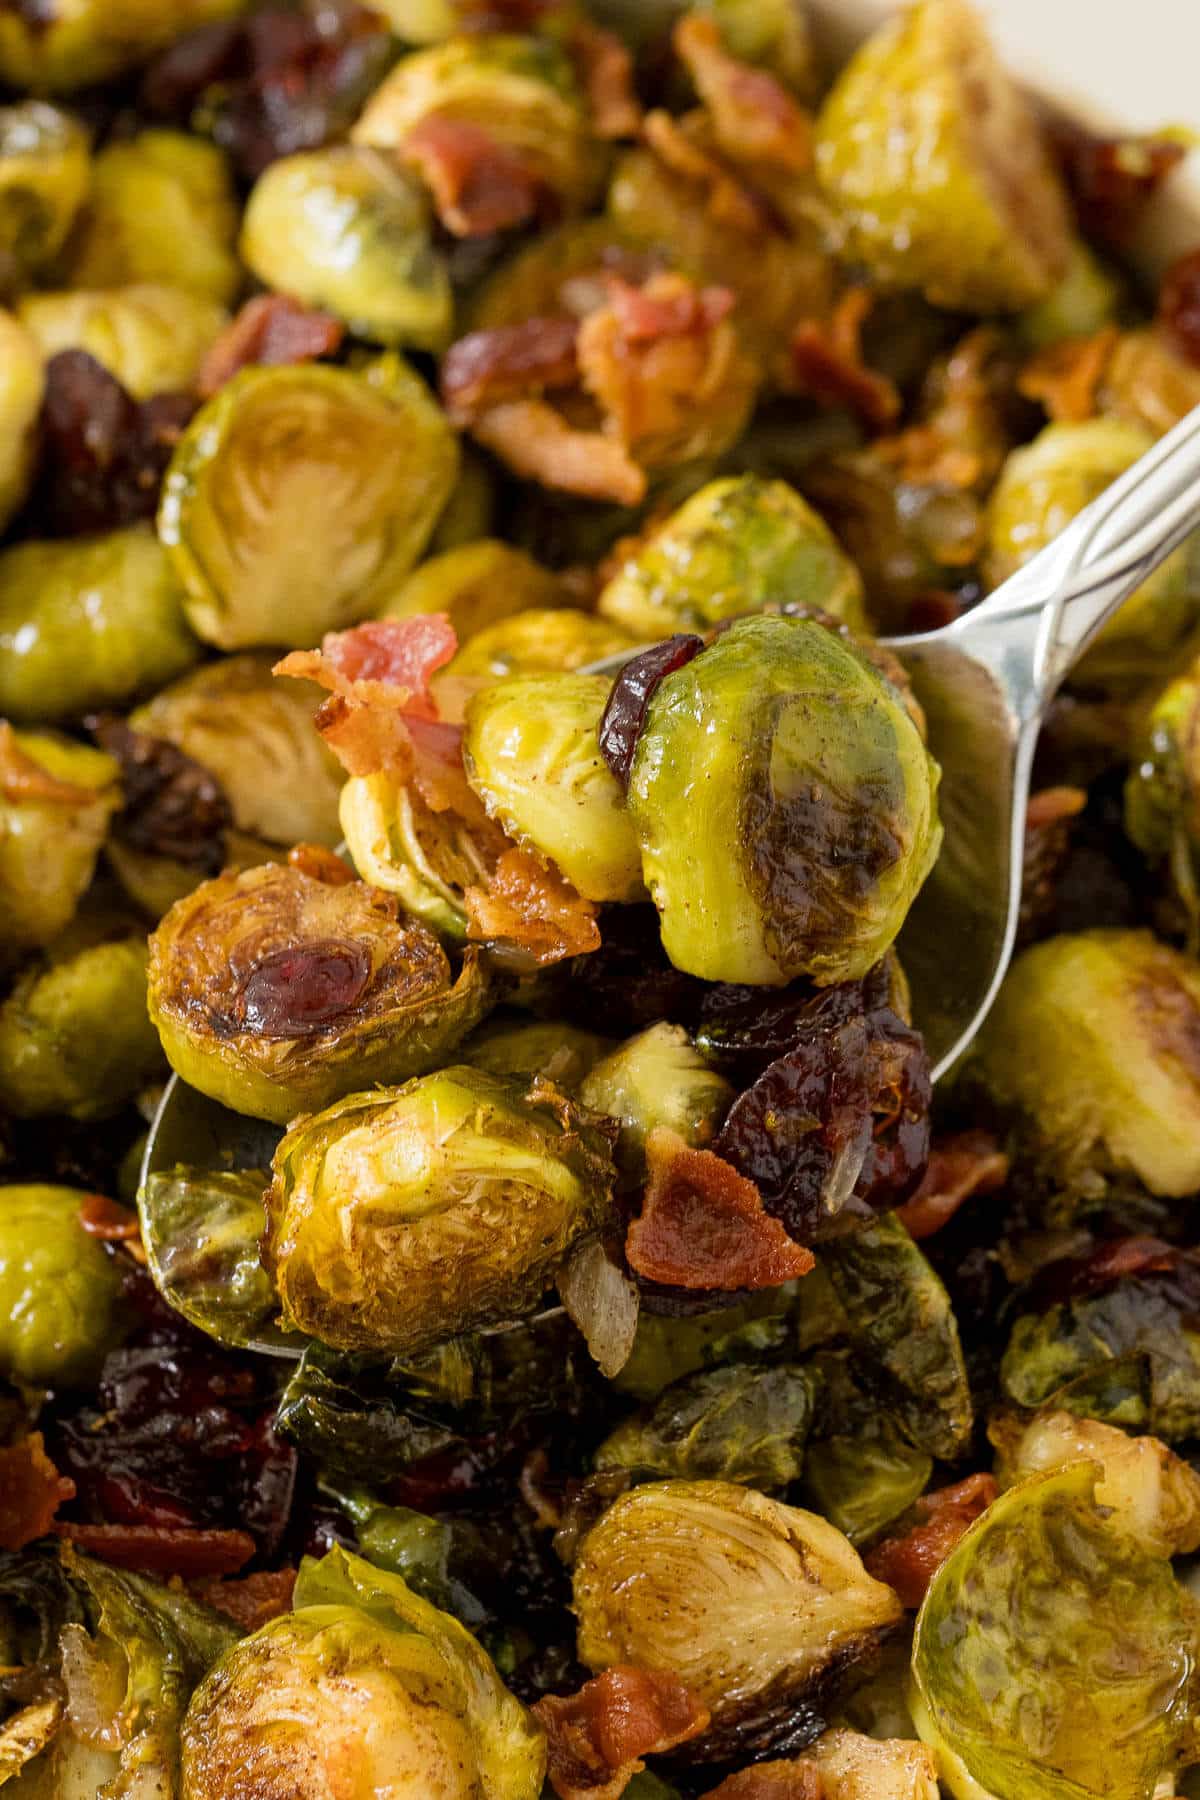 Roasted brussel sprouts on a serving spoon.